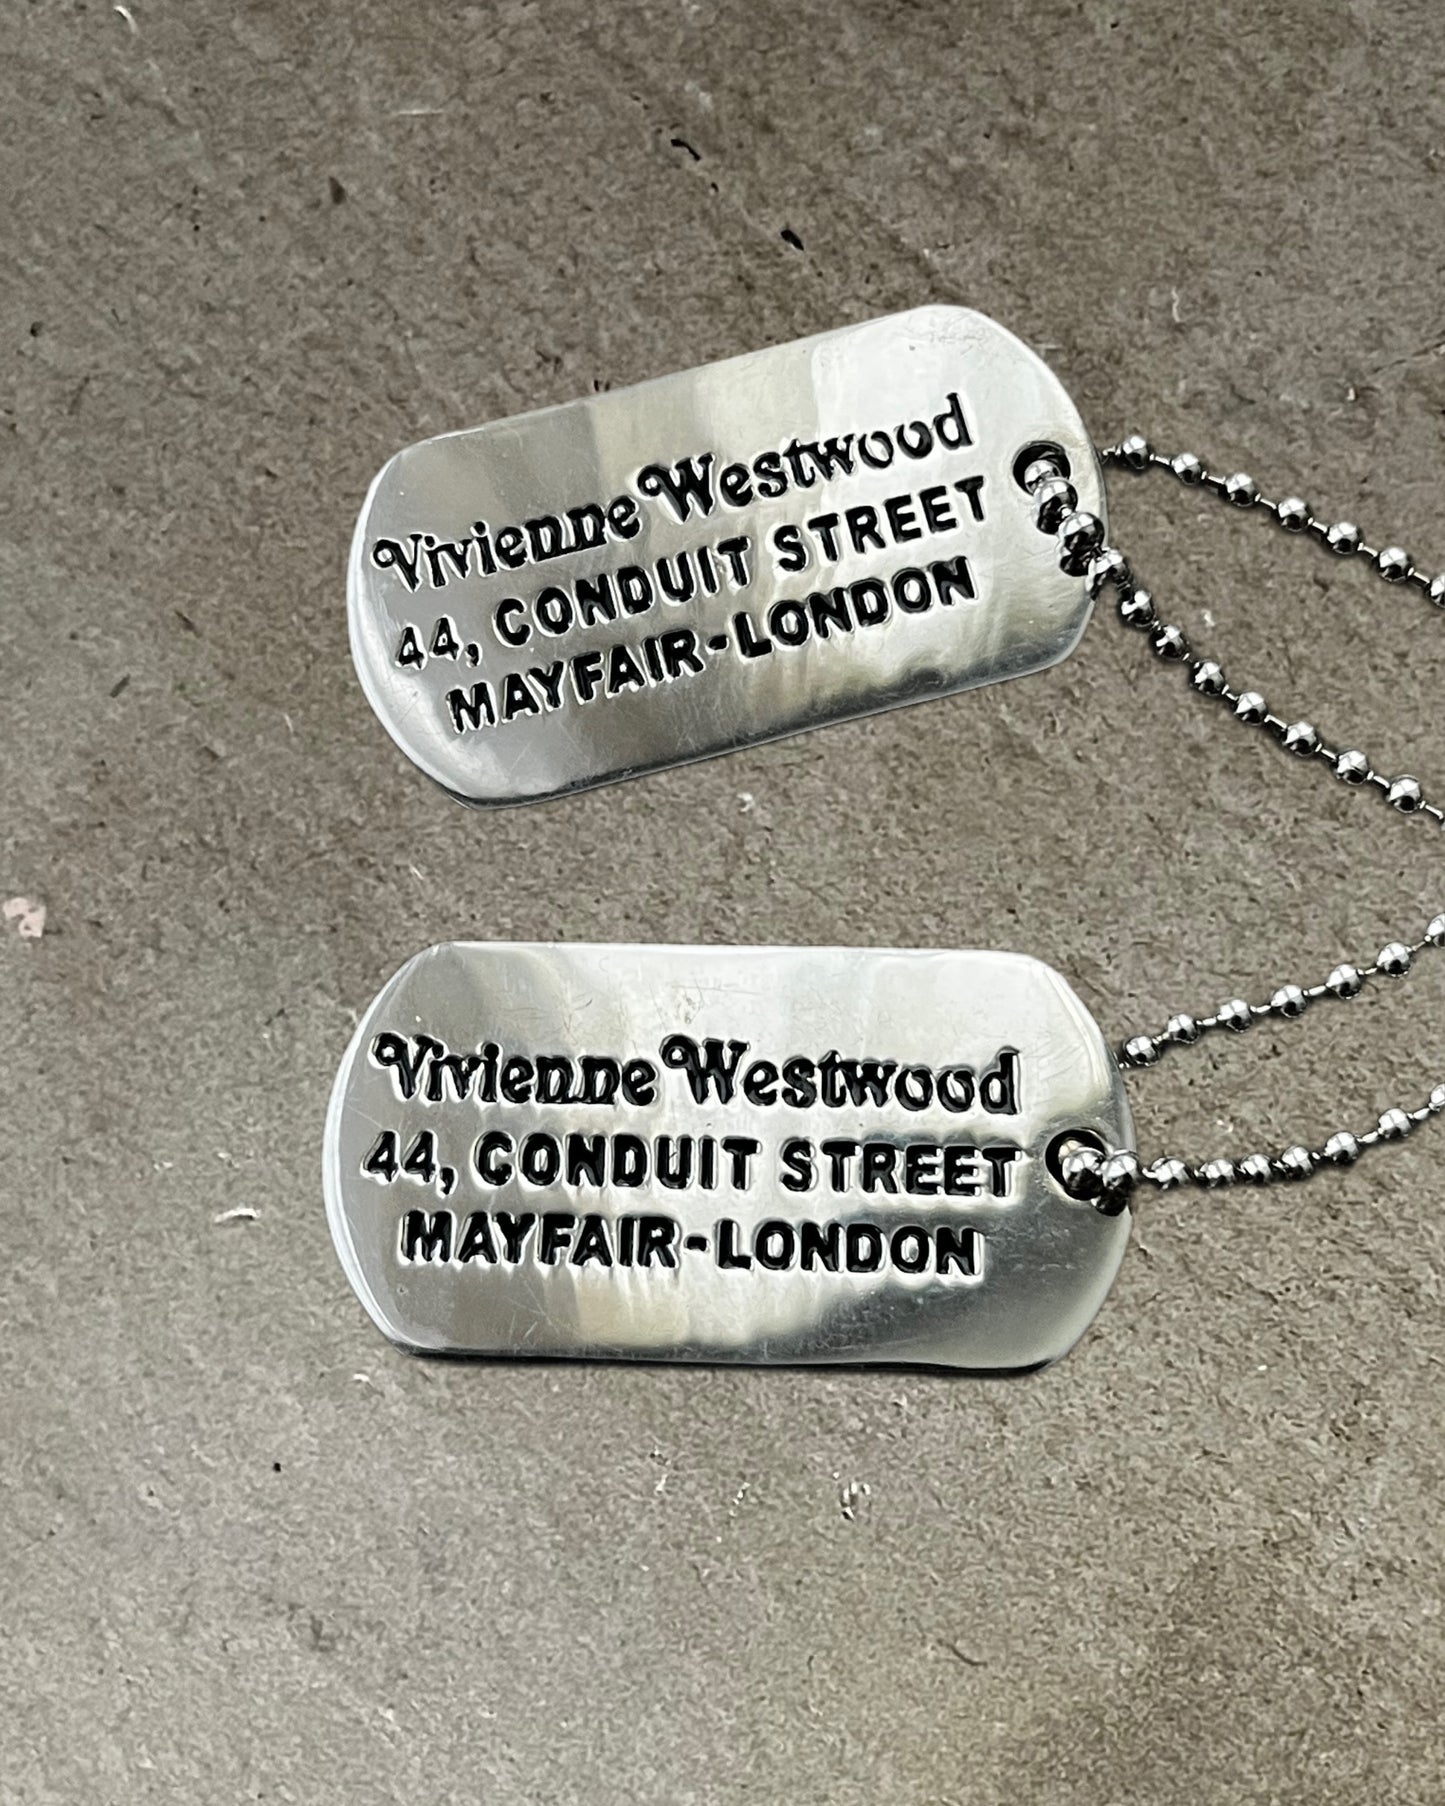 Vivienne Westwood "Too Fast To Live Too Young To Die" Dog Tag Necklace